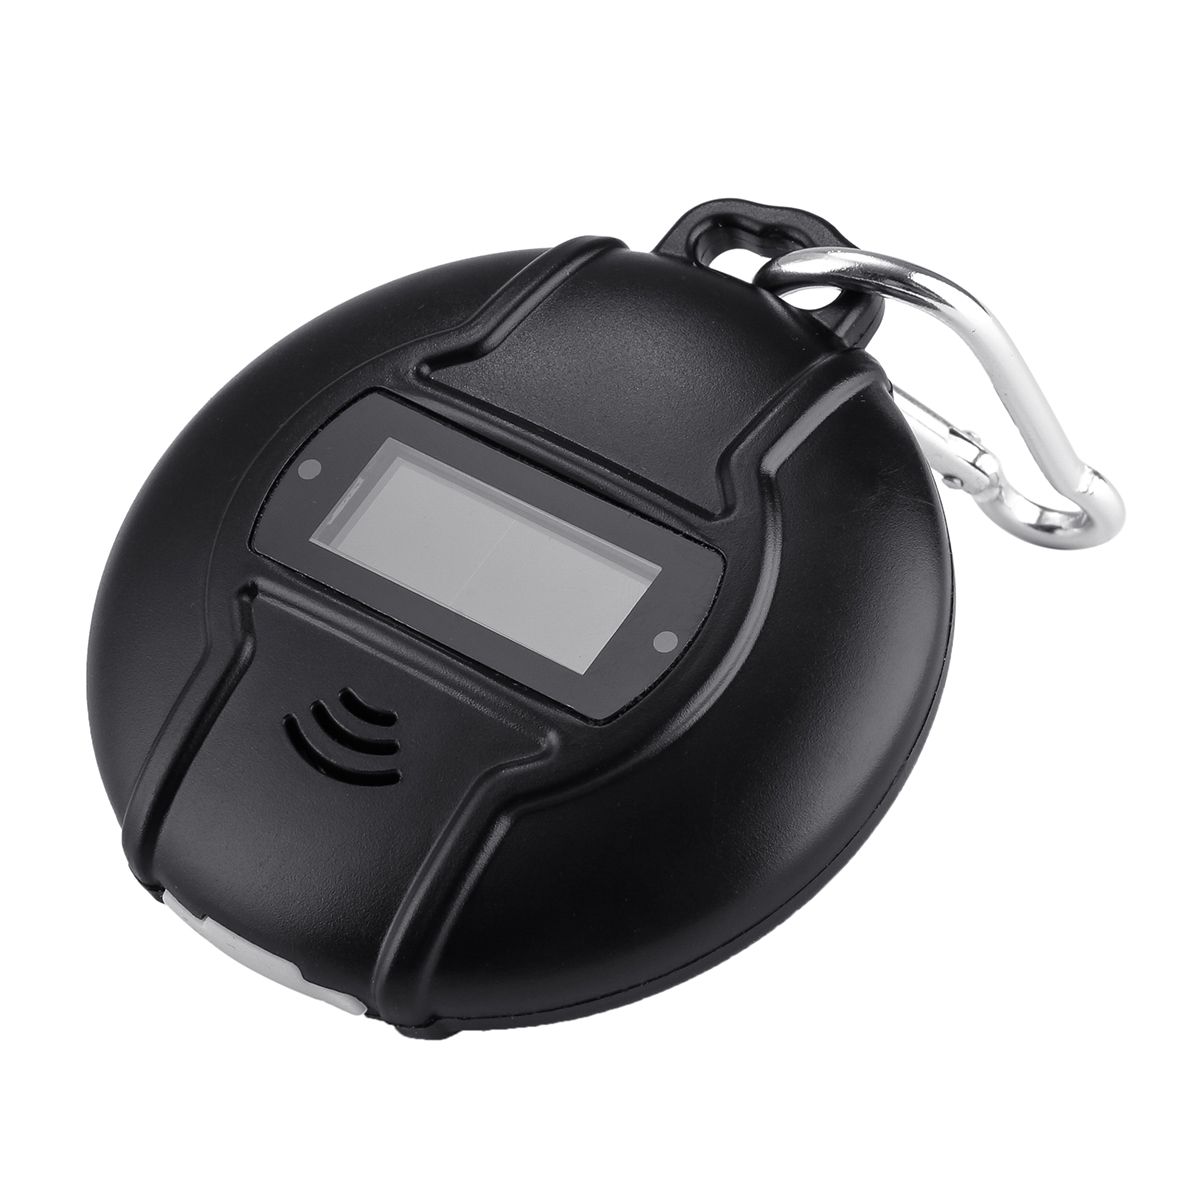 Solar-Drive-Mouse-Portable-Compass-Ultrasonic-Multifunction-Electronic-Mosquito-Repellent-Device-1276670